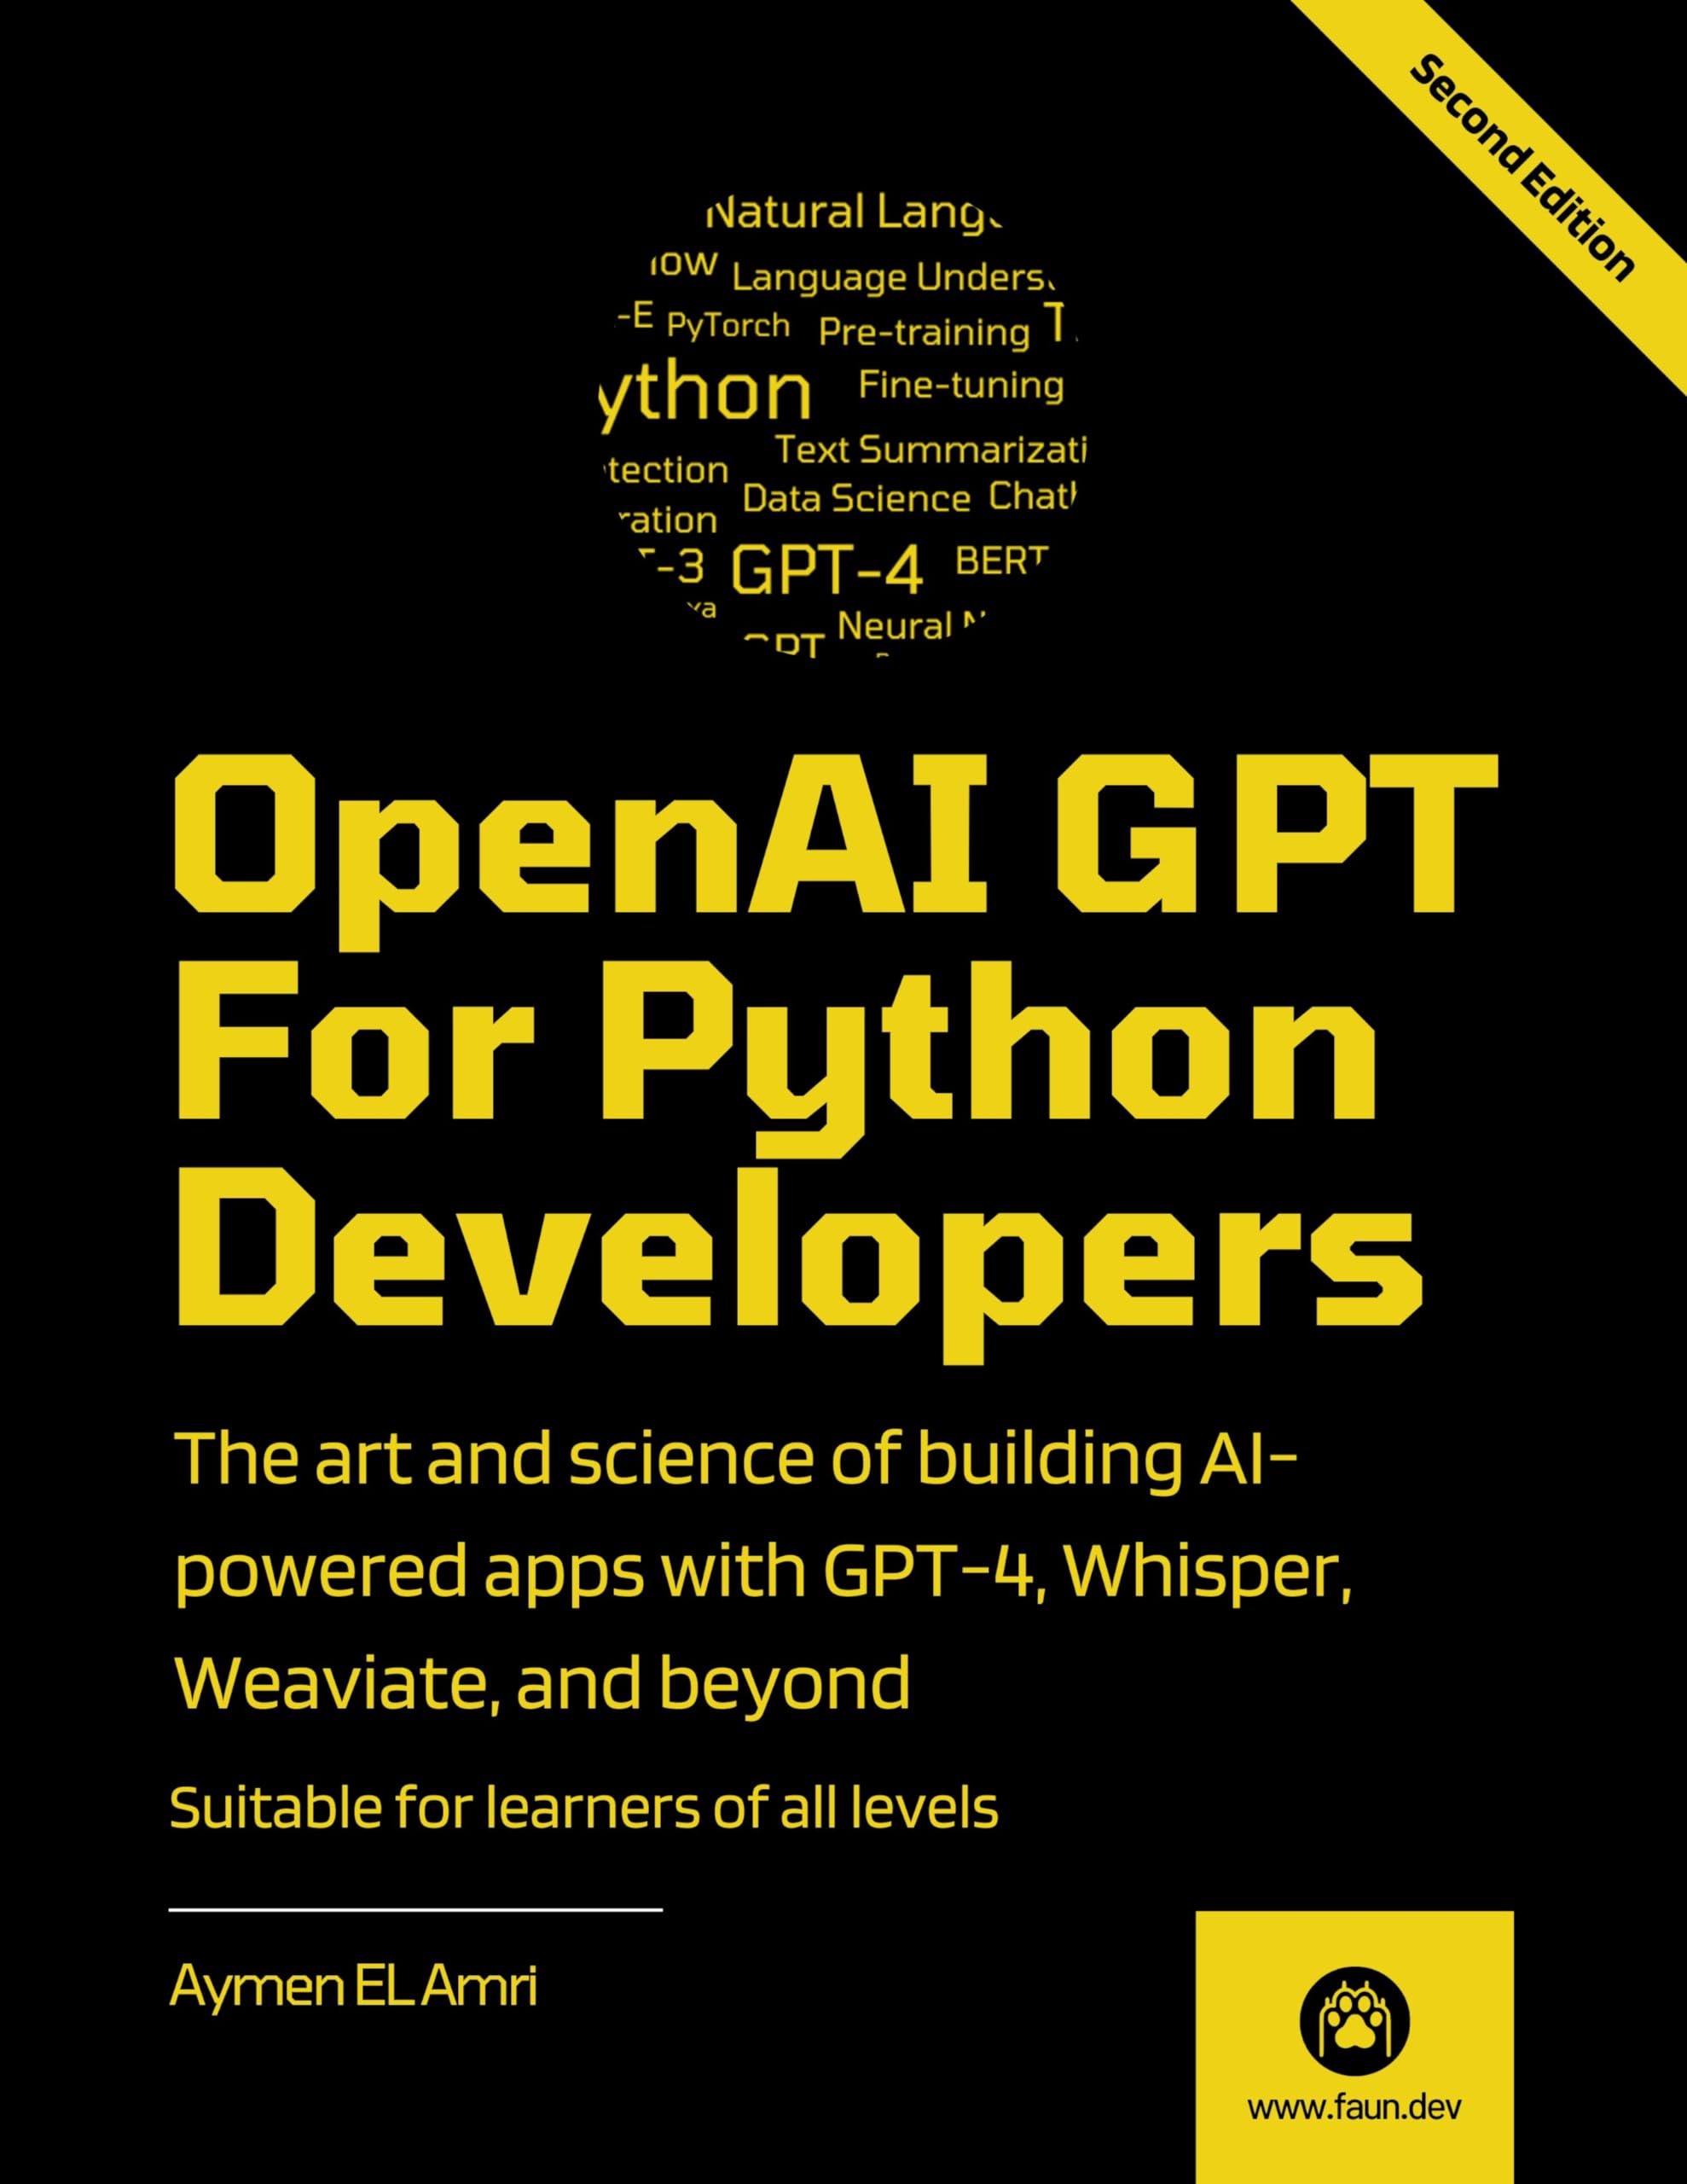 OpenAI GPT For Python Developers - 2nd Edition: The art and science of building AI-powered apps with GPT-4, Whisper, Weaviate, and beyond